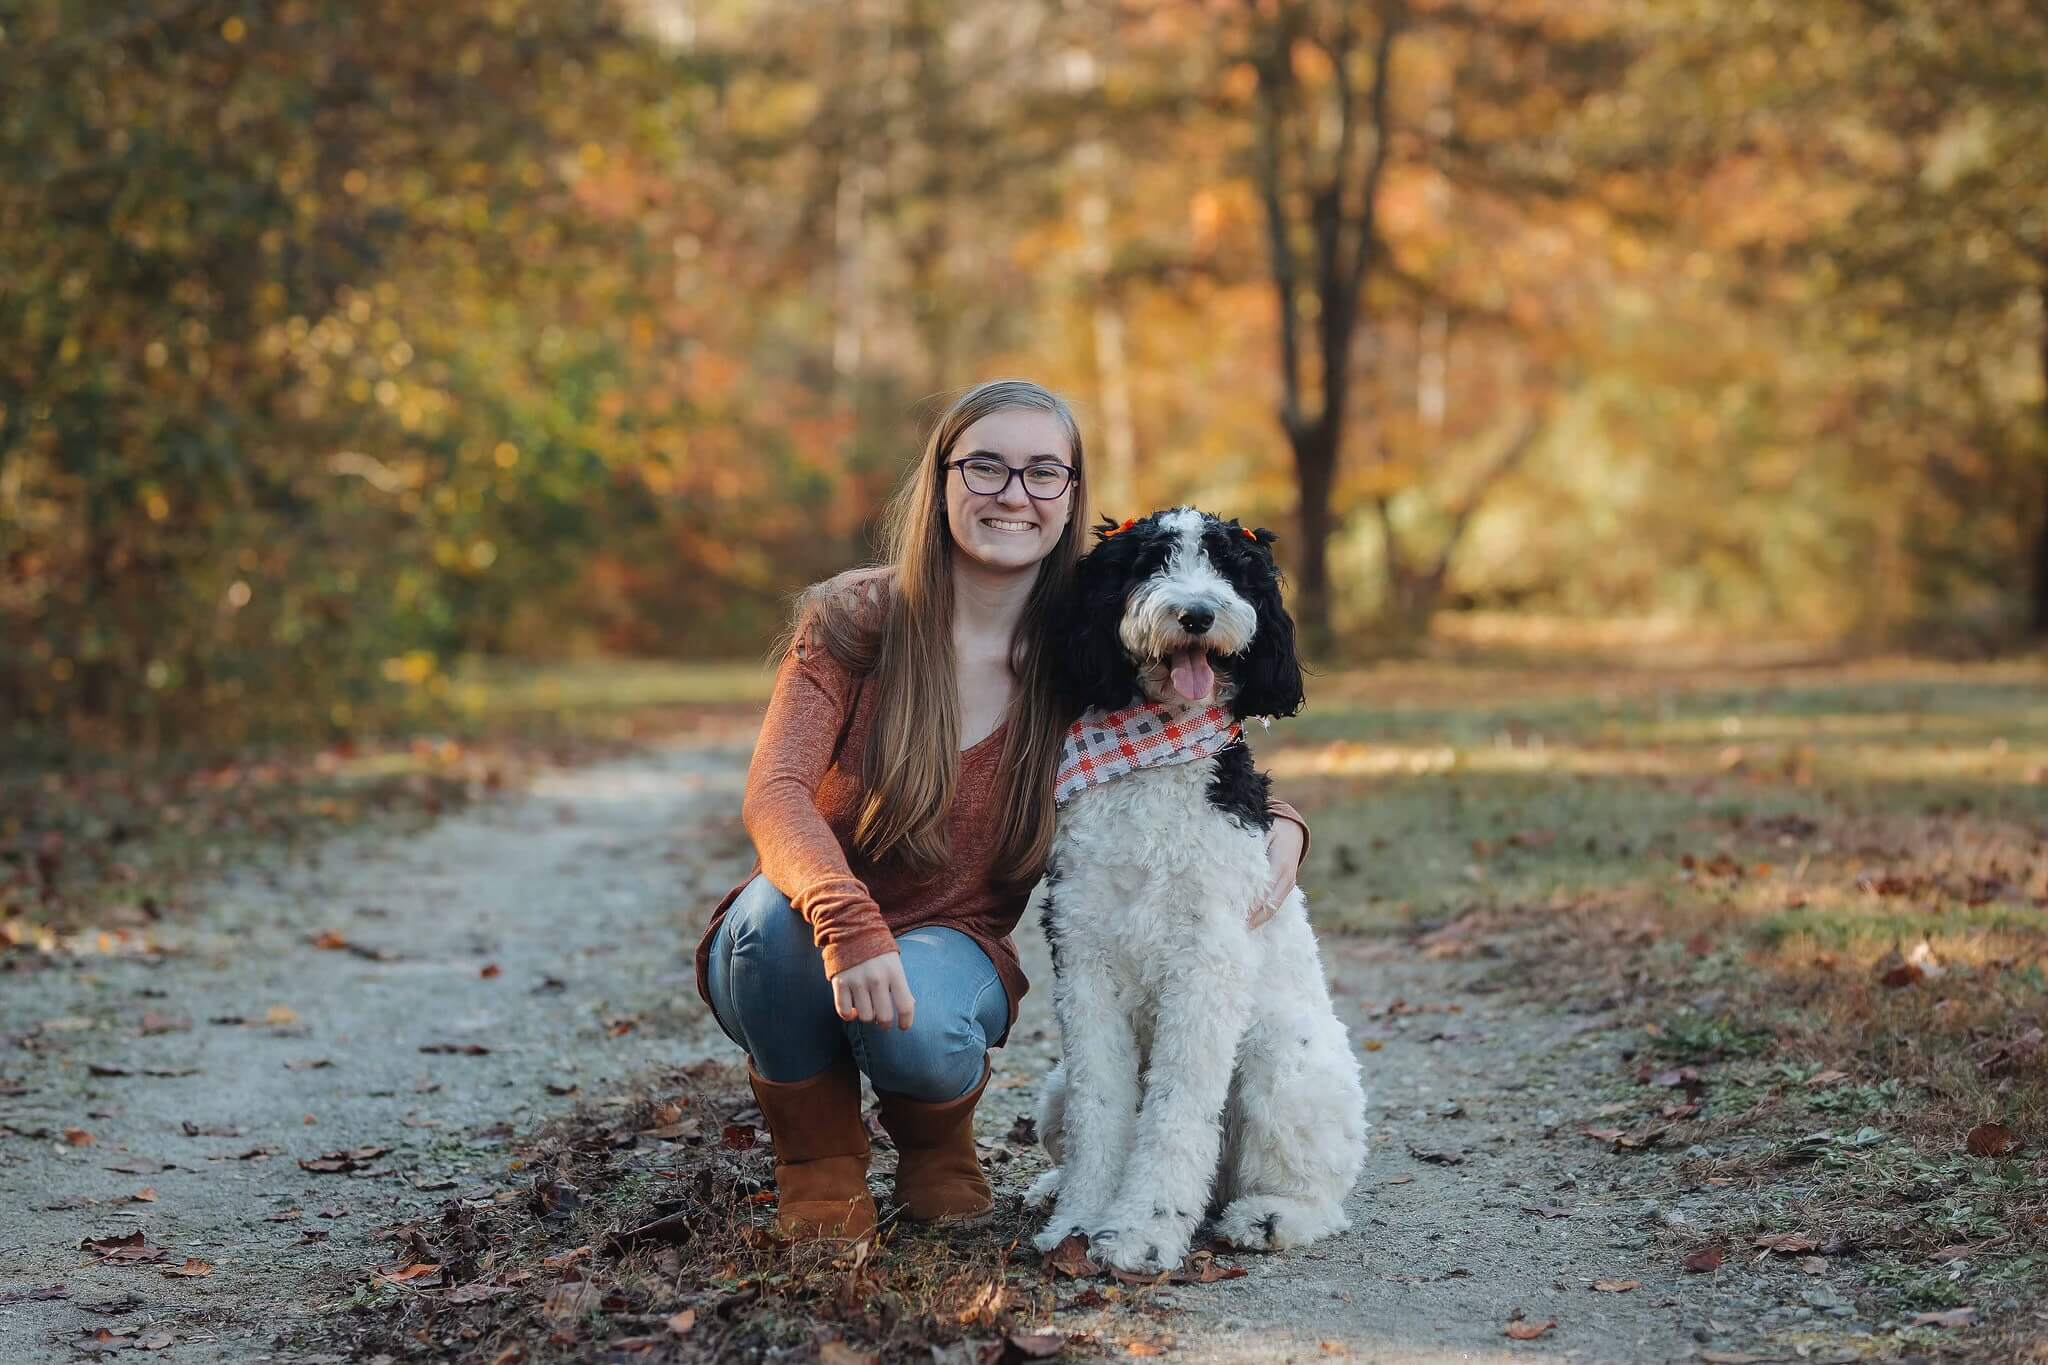 College student poses with her dog on a trail with fall colored leaves on trees in the background.